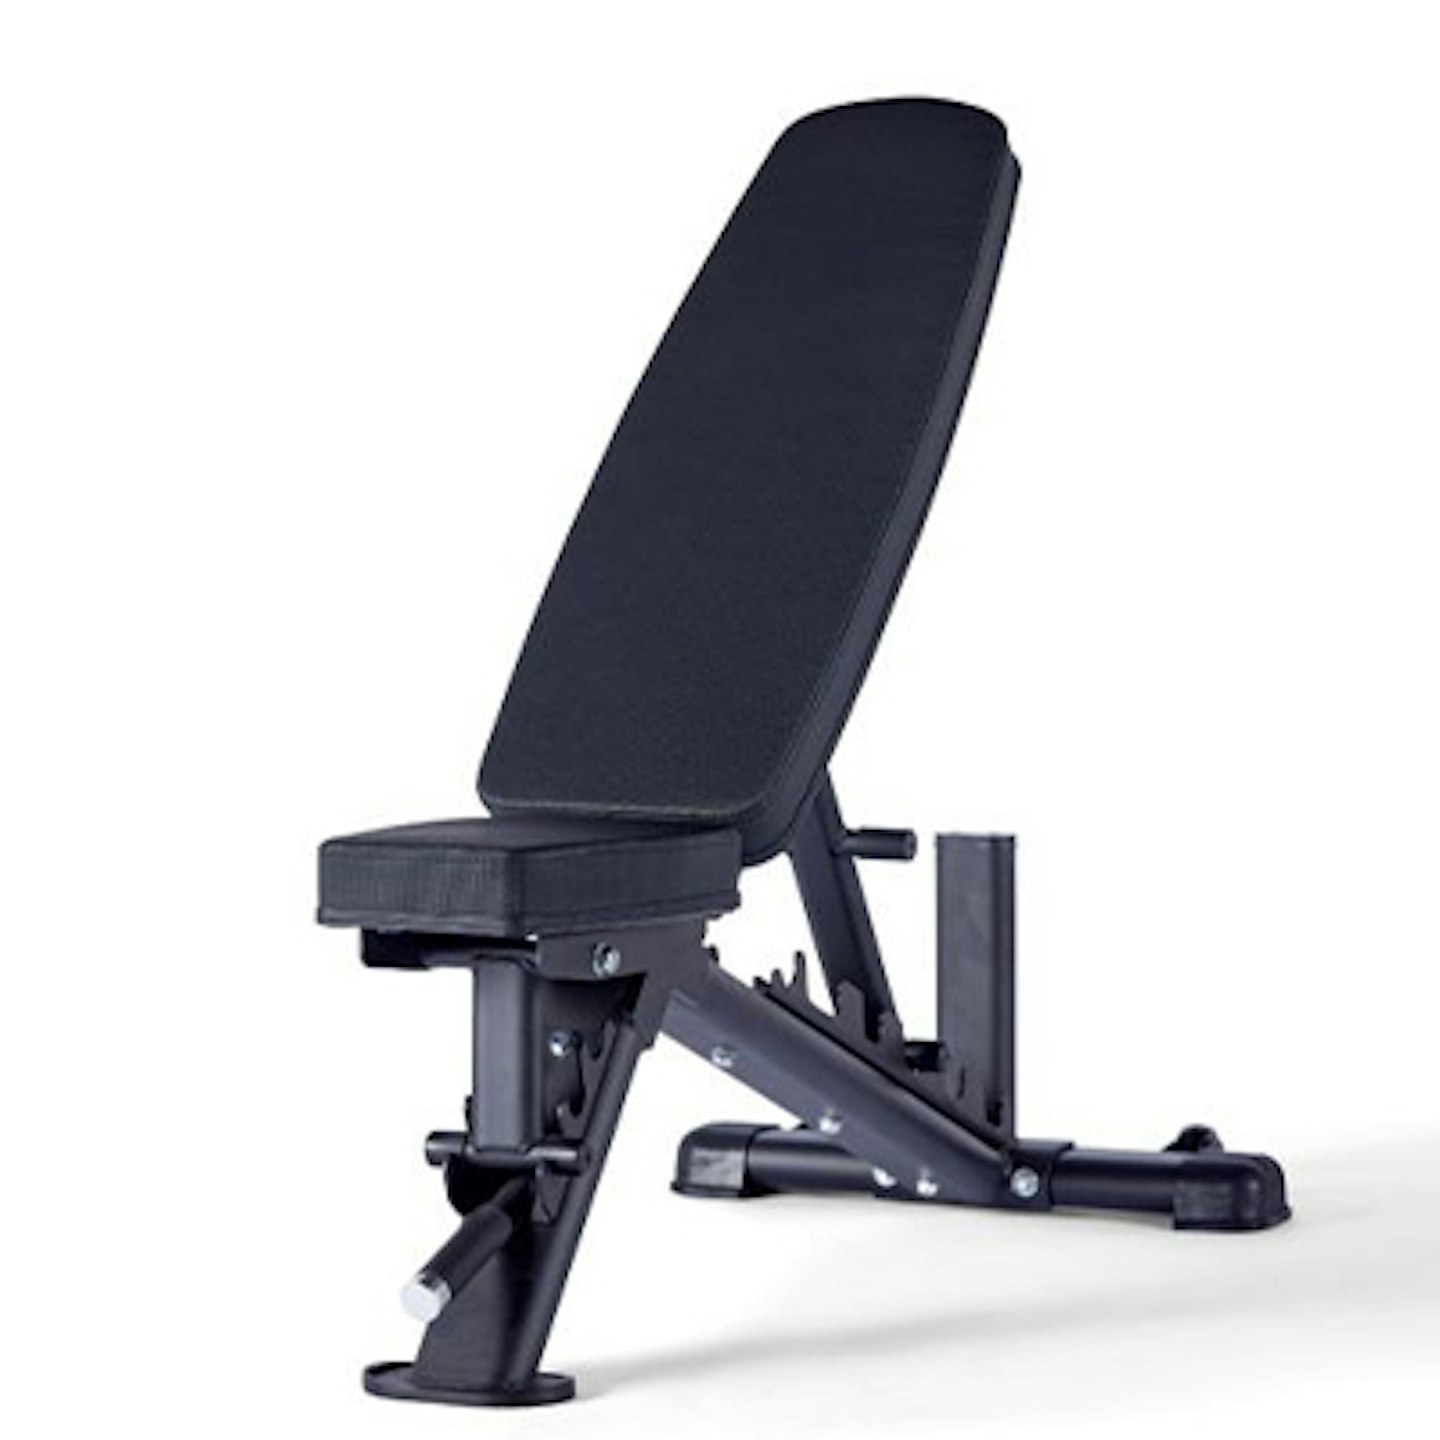 Again Faster® Team Plus Adjustable Bench